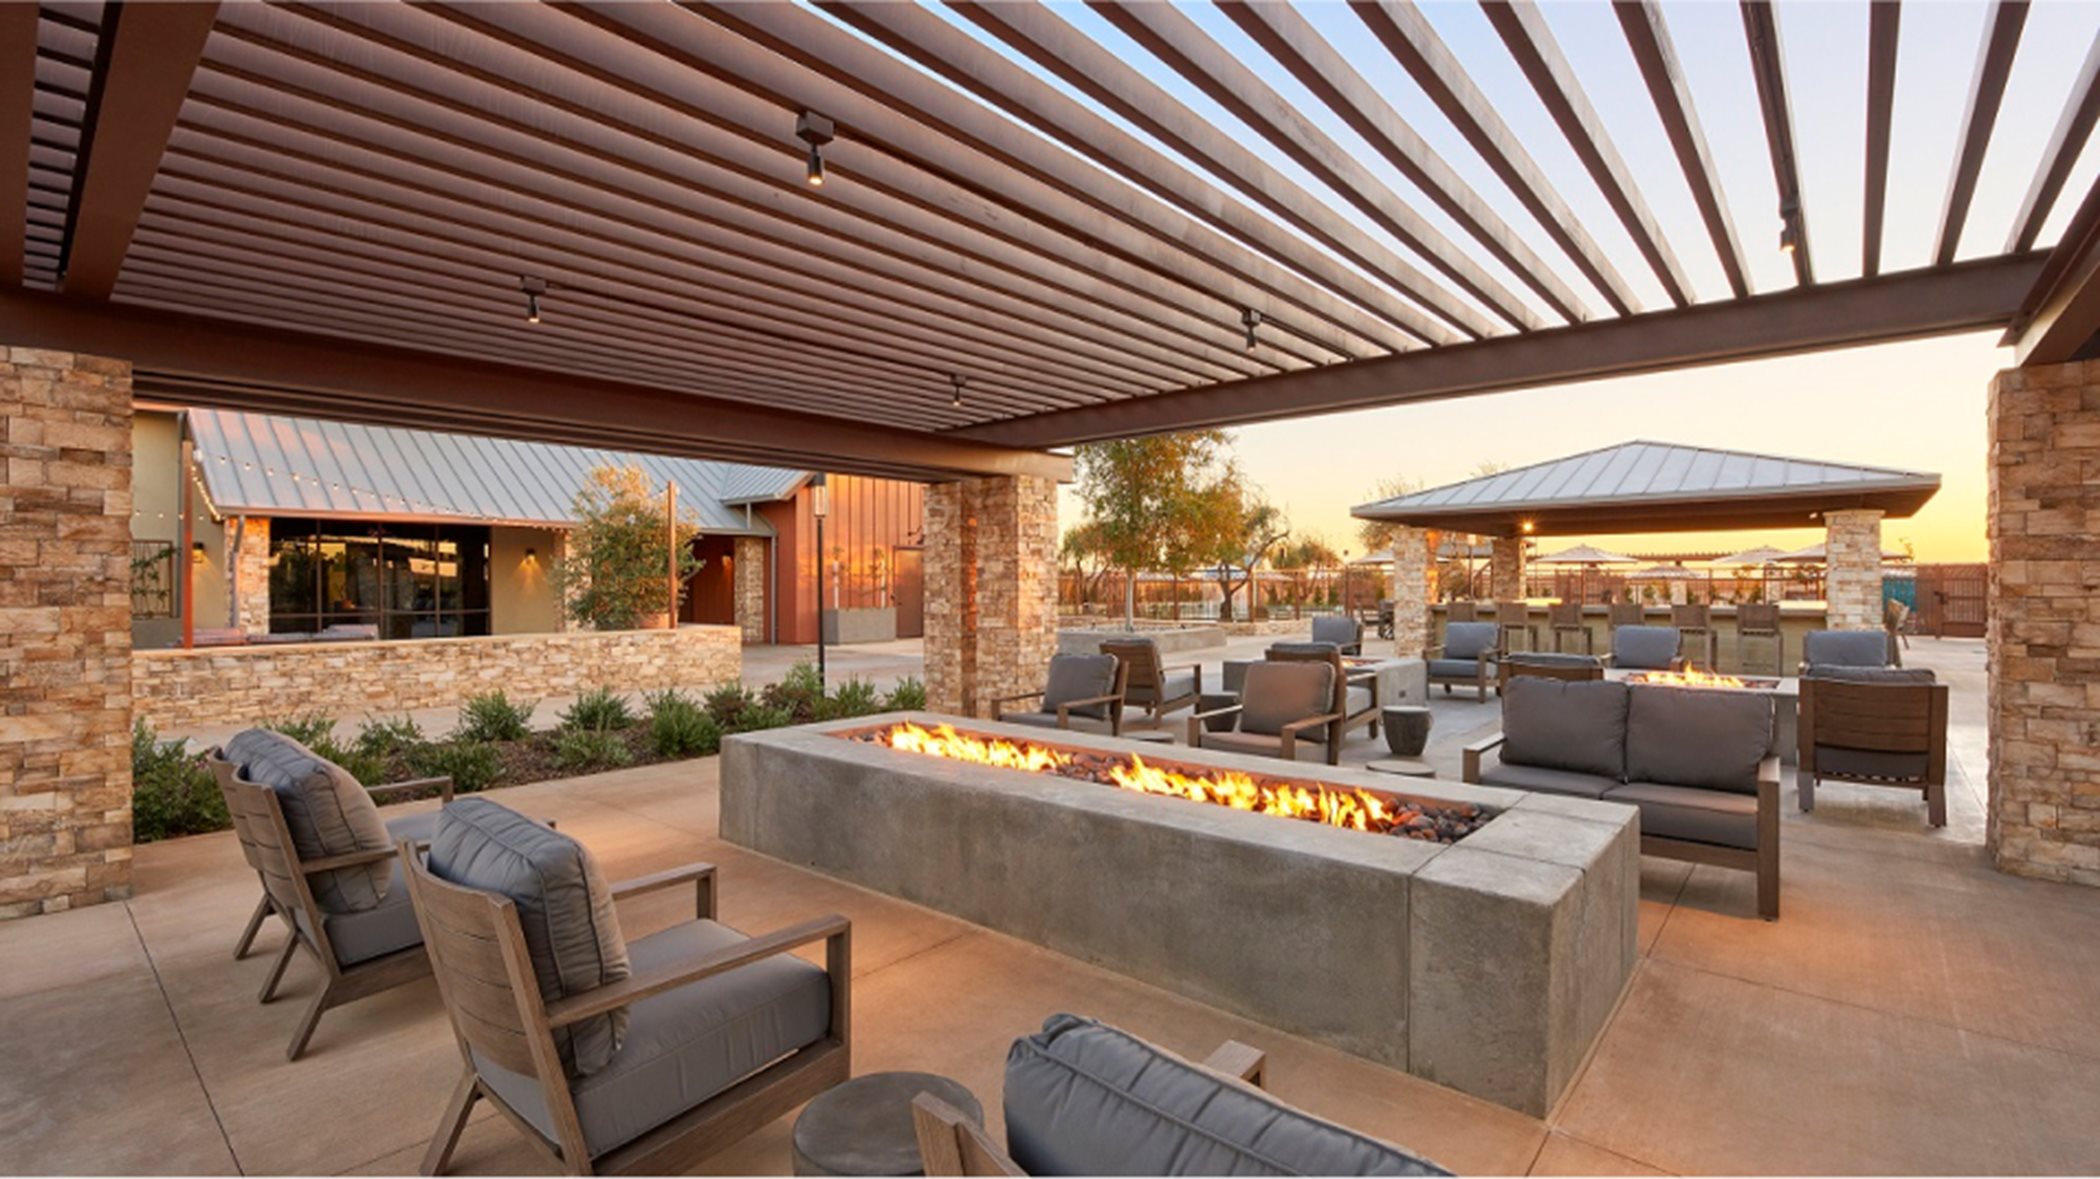 Clubhouse amenity outdoor fire pit